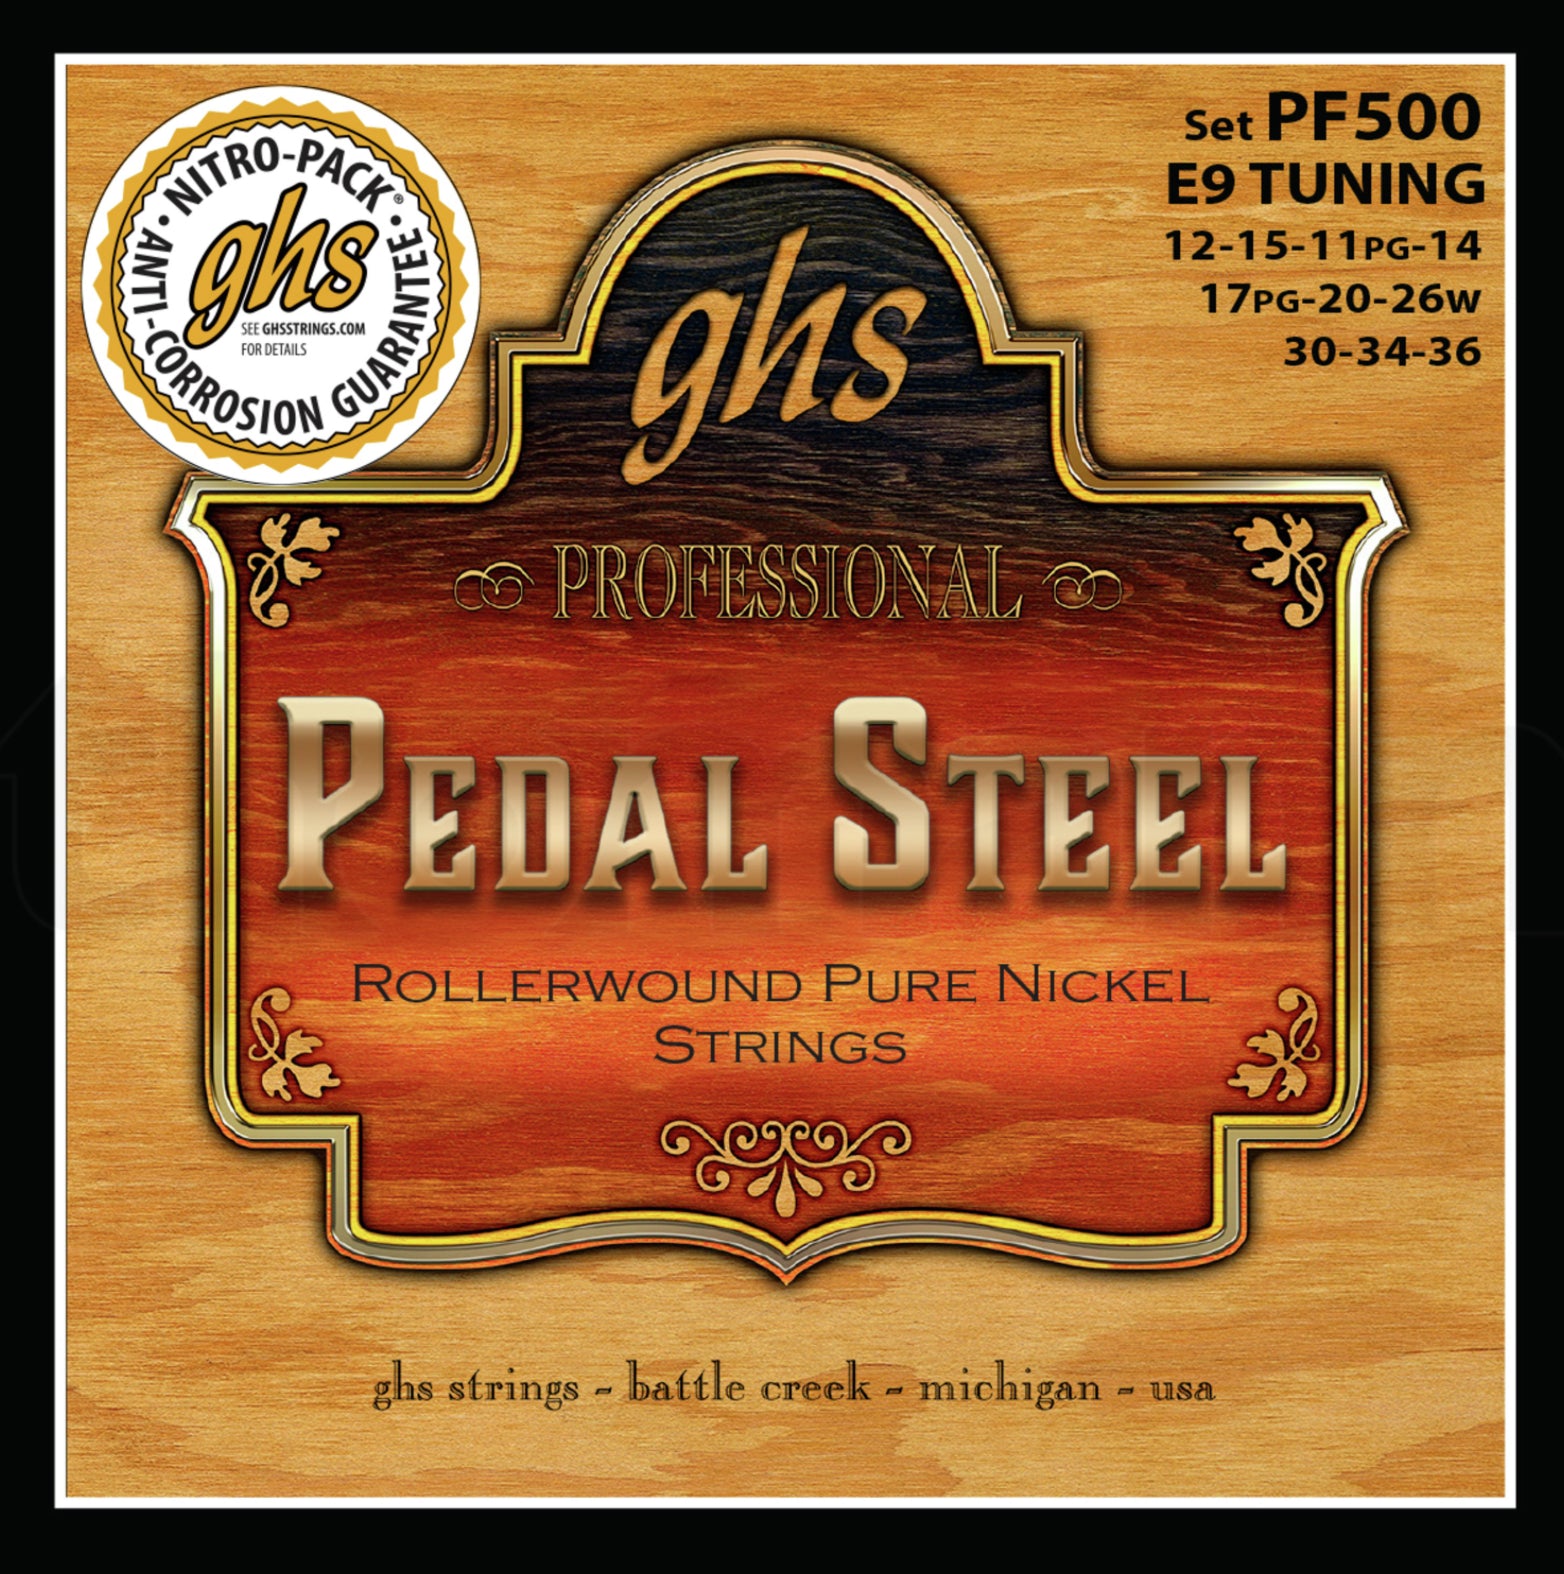 GHS Professional Pedal Steel Rollerwound Pure Nickel Lap Guitar Strings (PF500) E9 Tuning